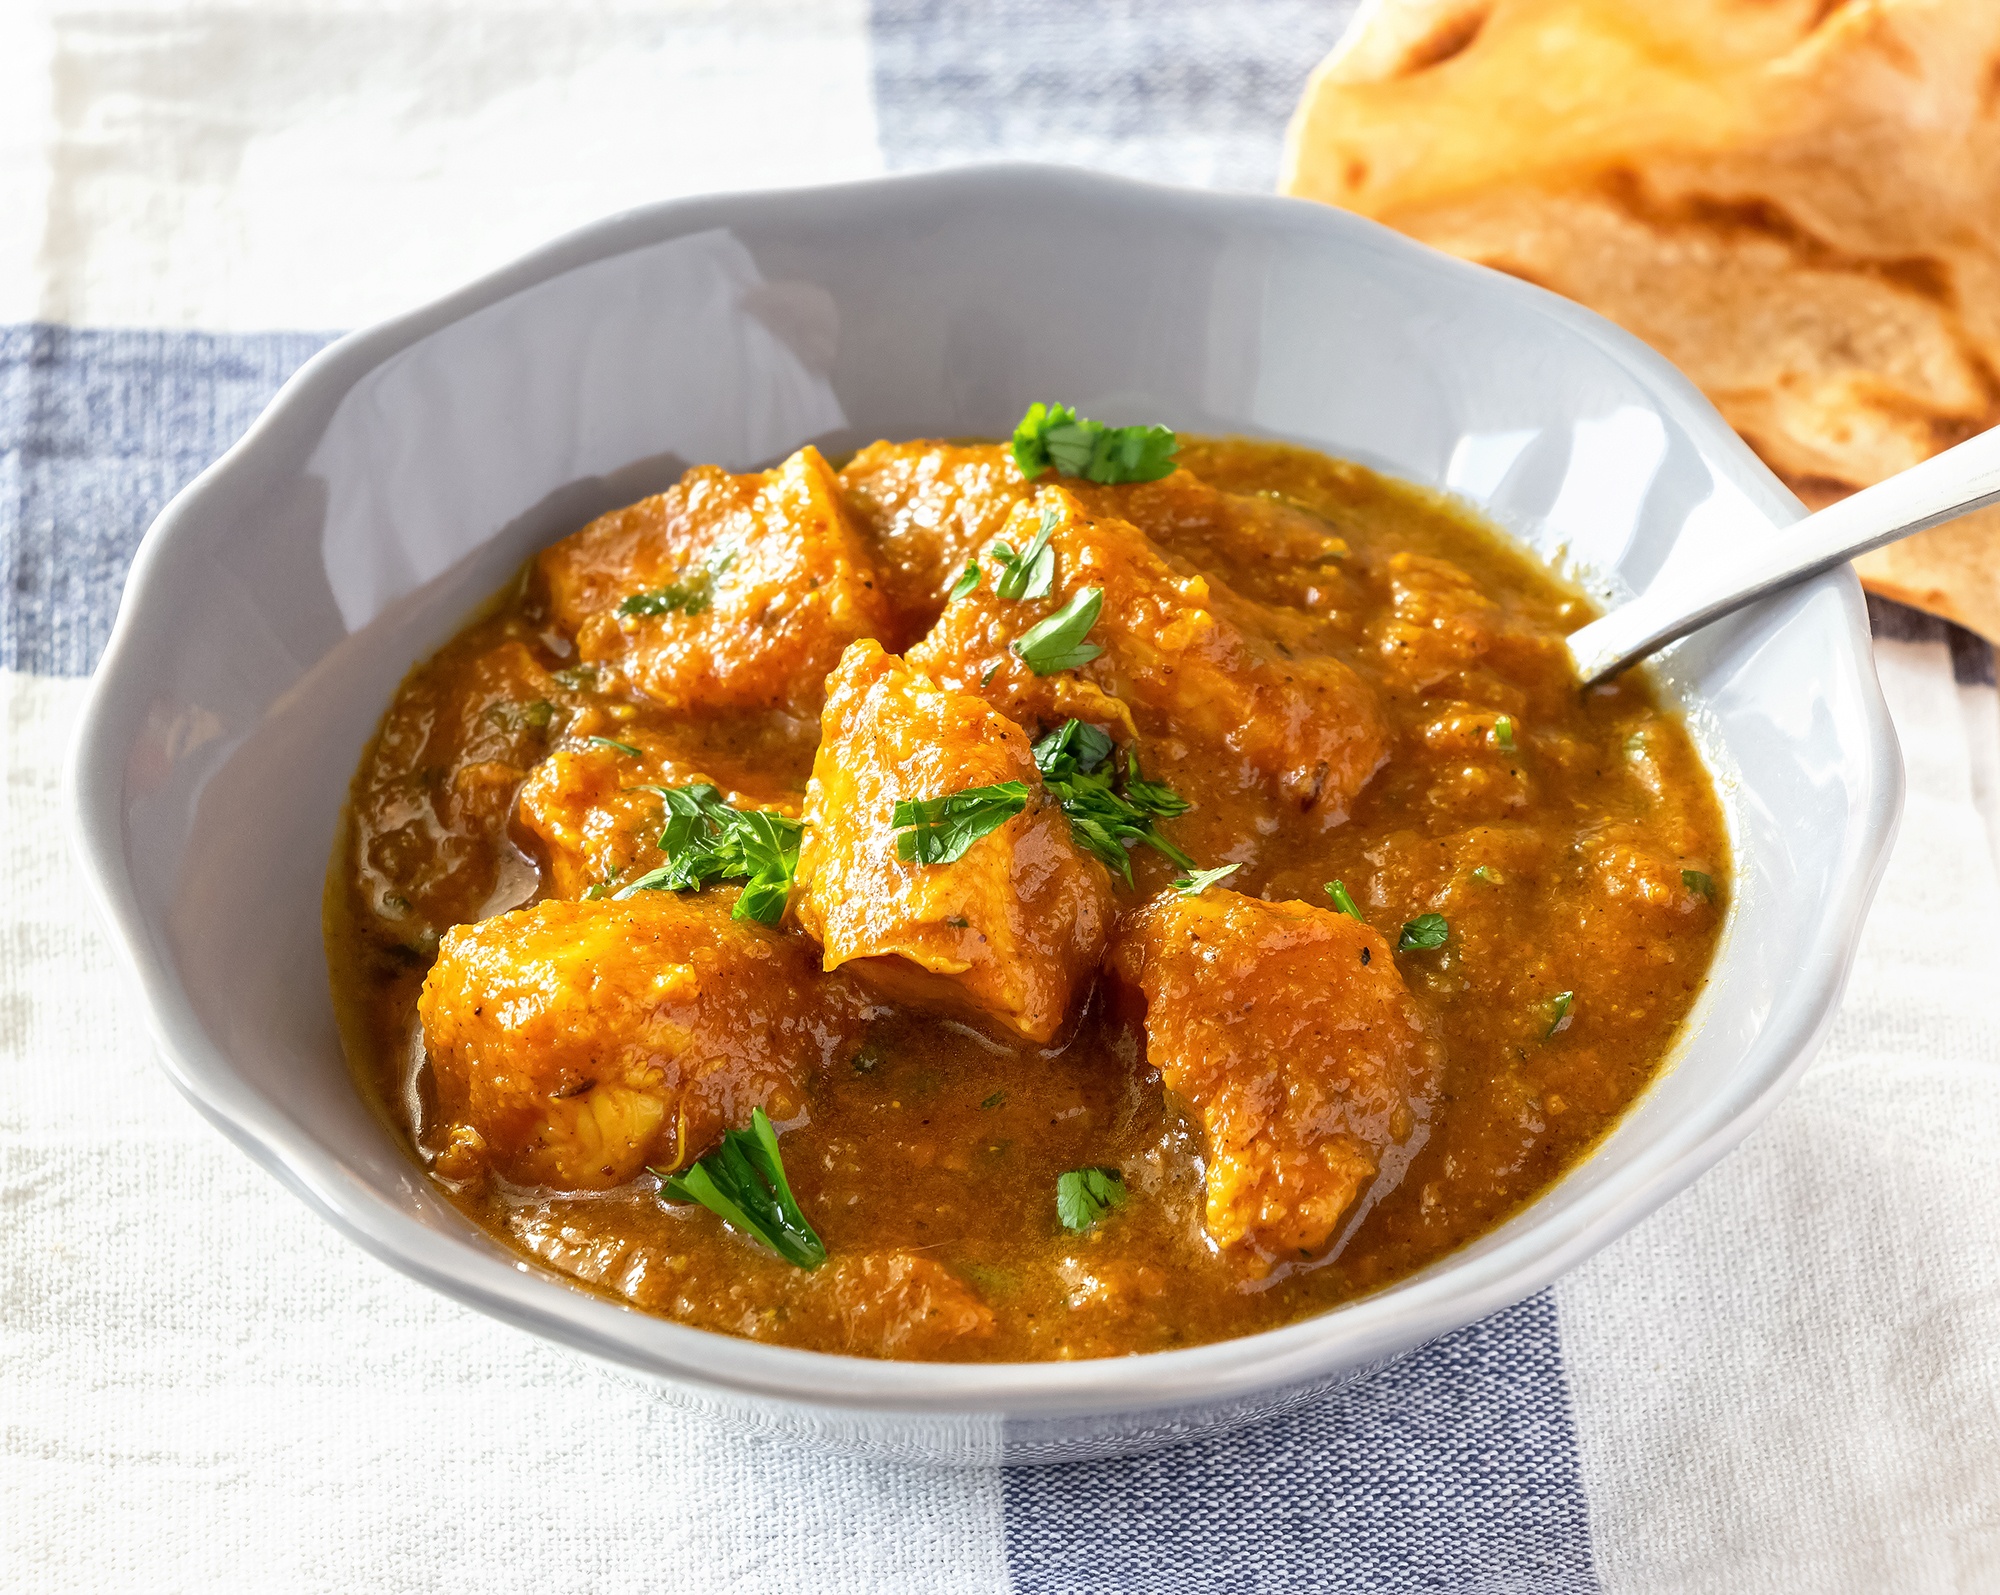 https://www.themaasclinic.com/wp-content/uploads/2020/03/Maas_Clinic_ChickenCurry.jpg